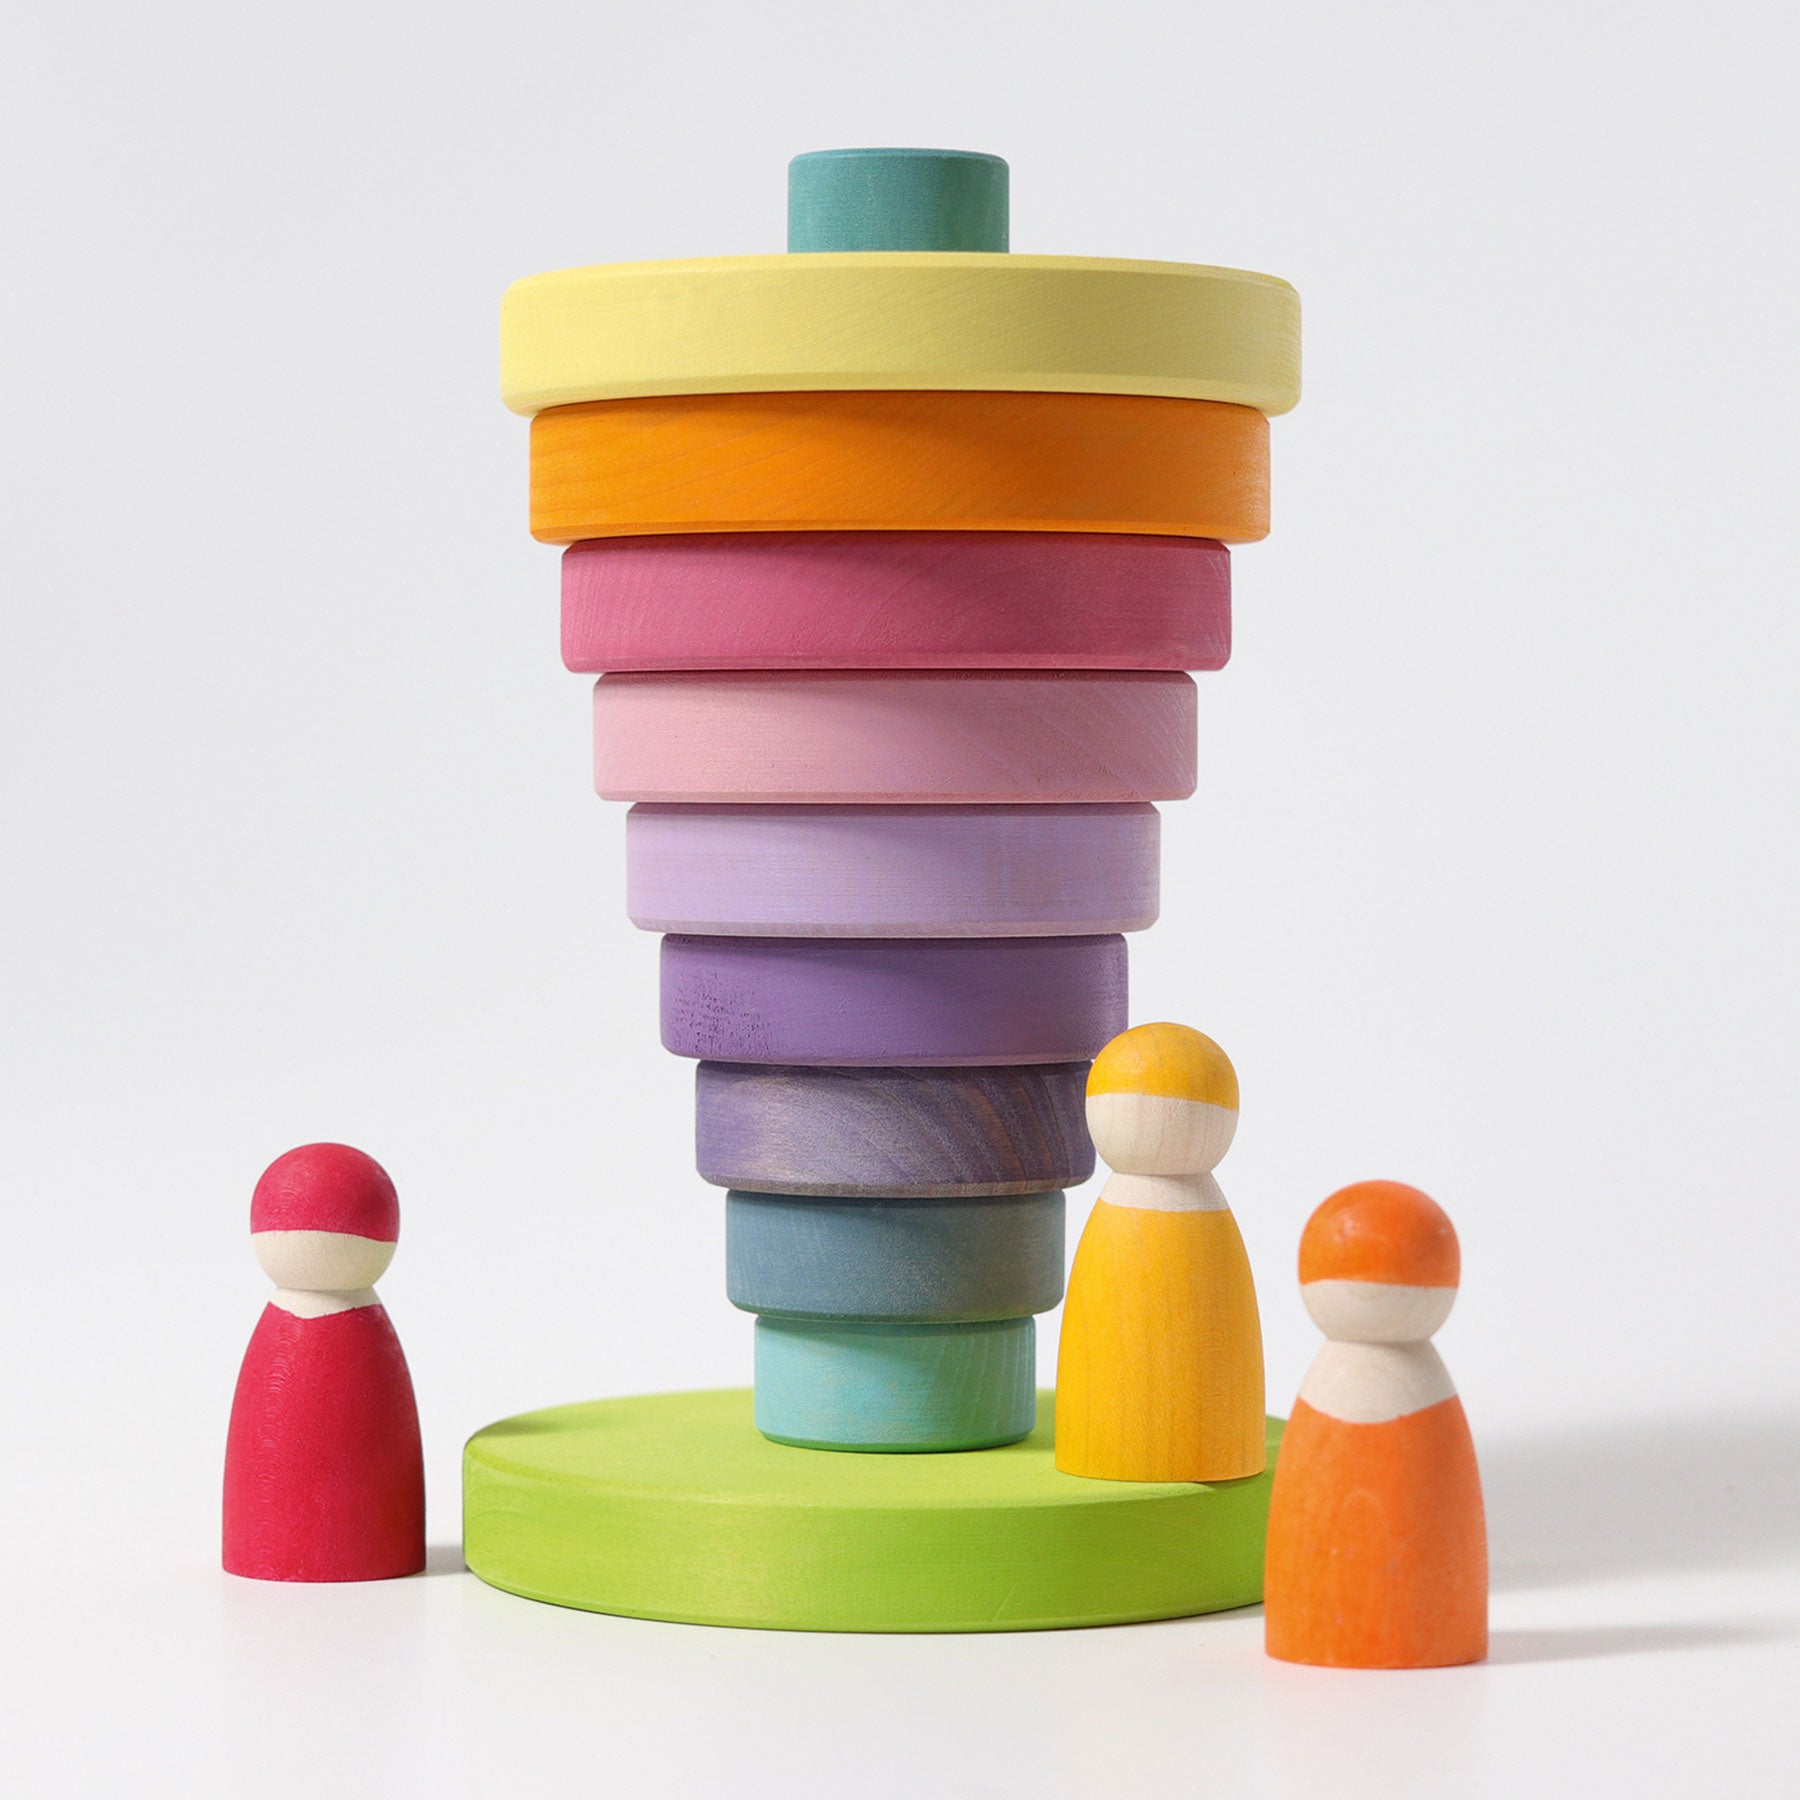 Grimm's Pastel Conical Tower - Bueno Blocks